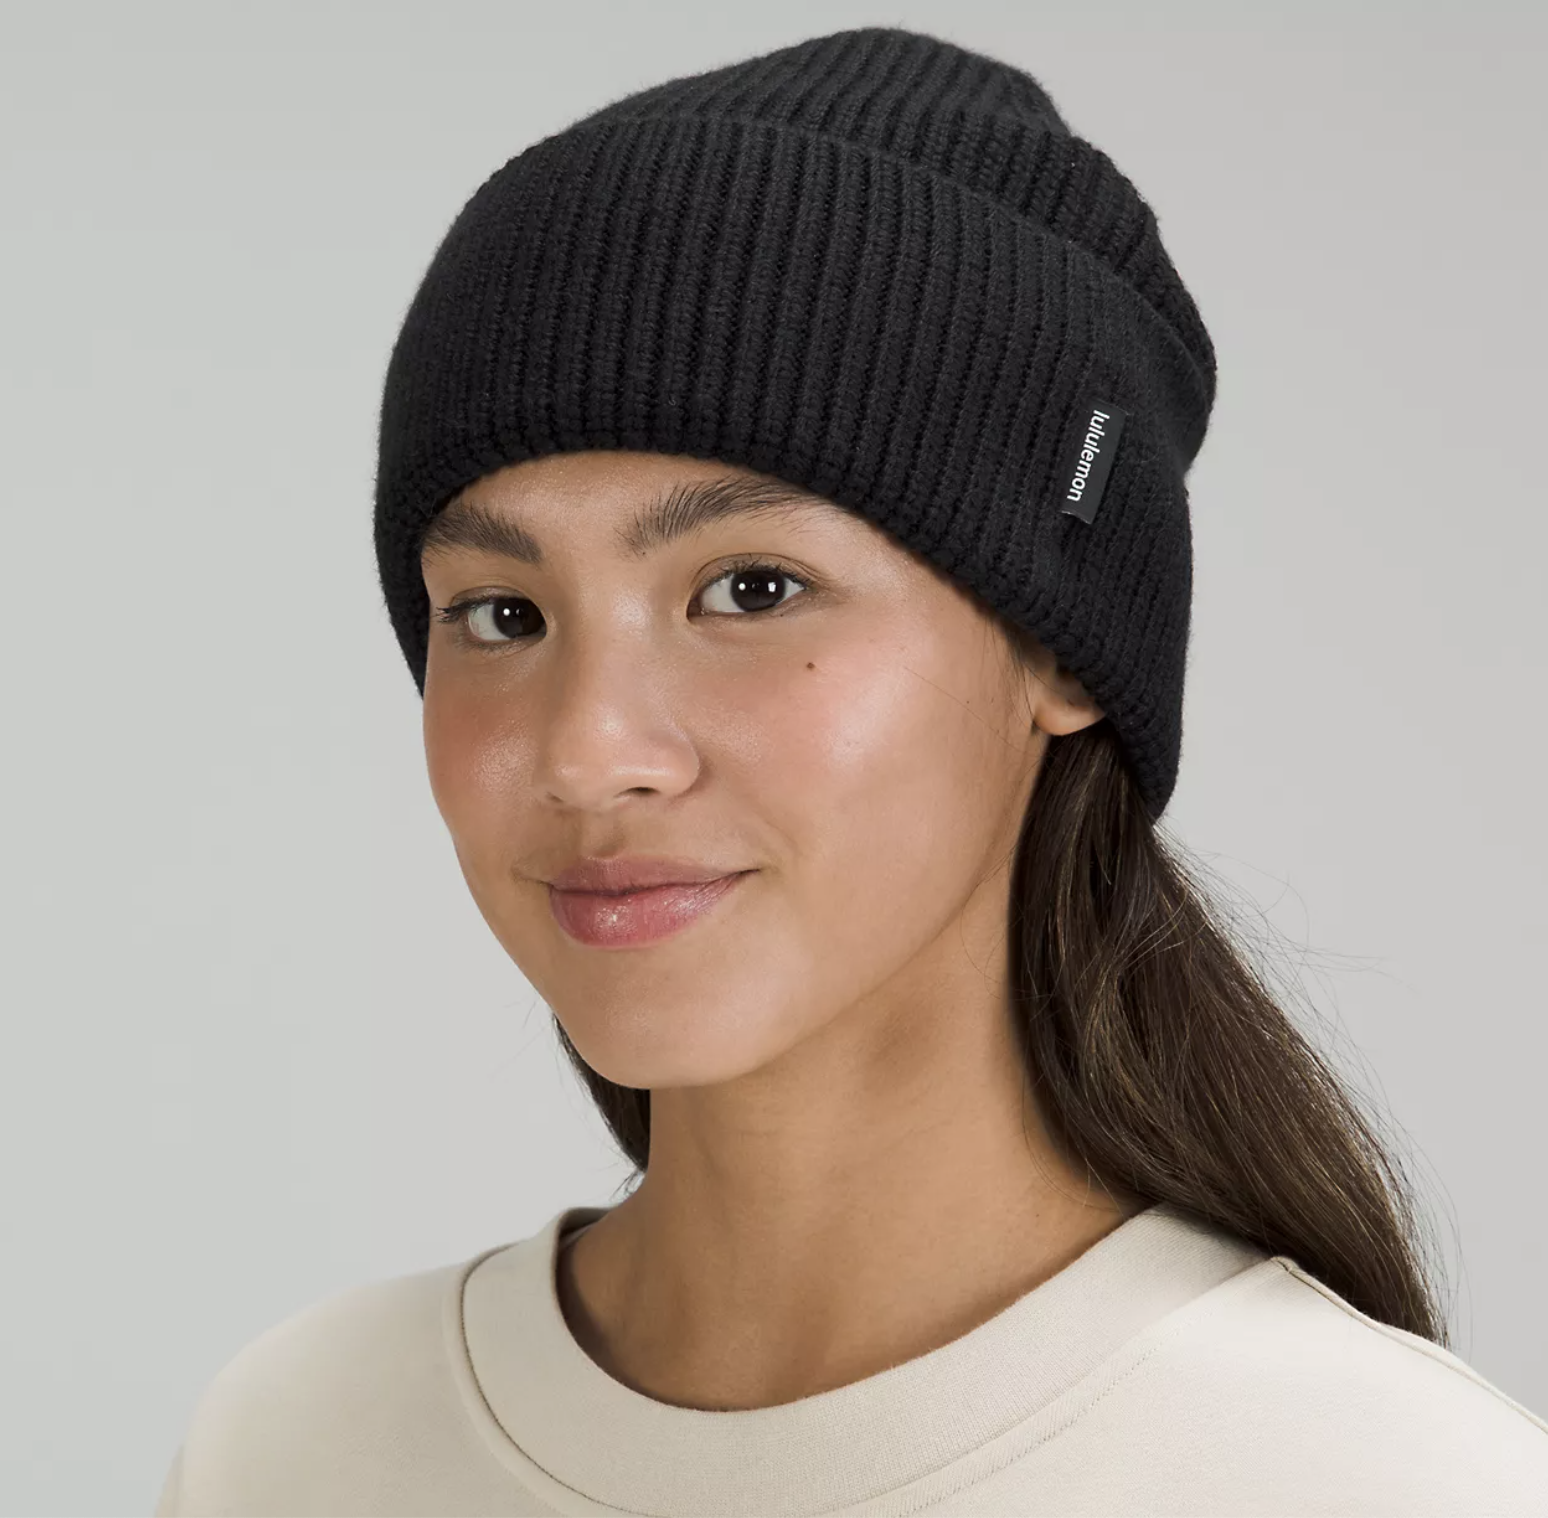 A person wearing the beanie with a crewneck